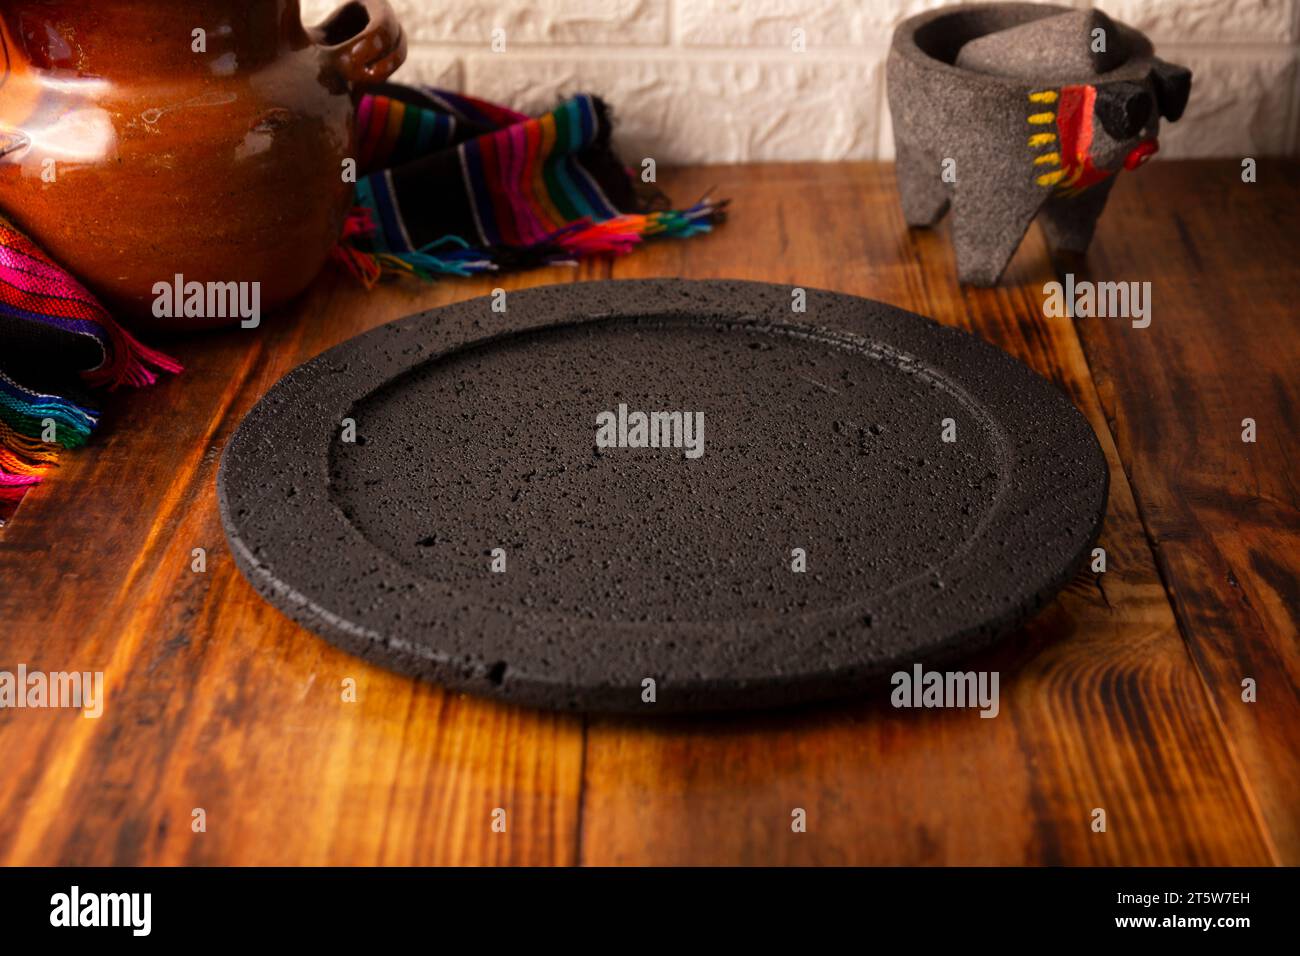 Mexican Comal - cookware stock photo. Image of drink - 38725442